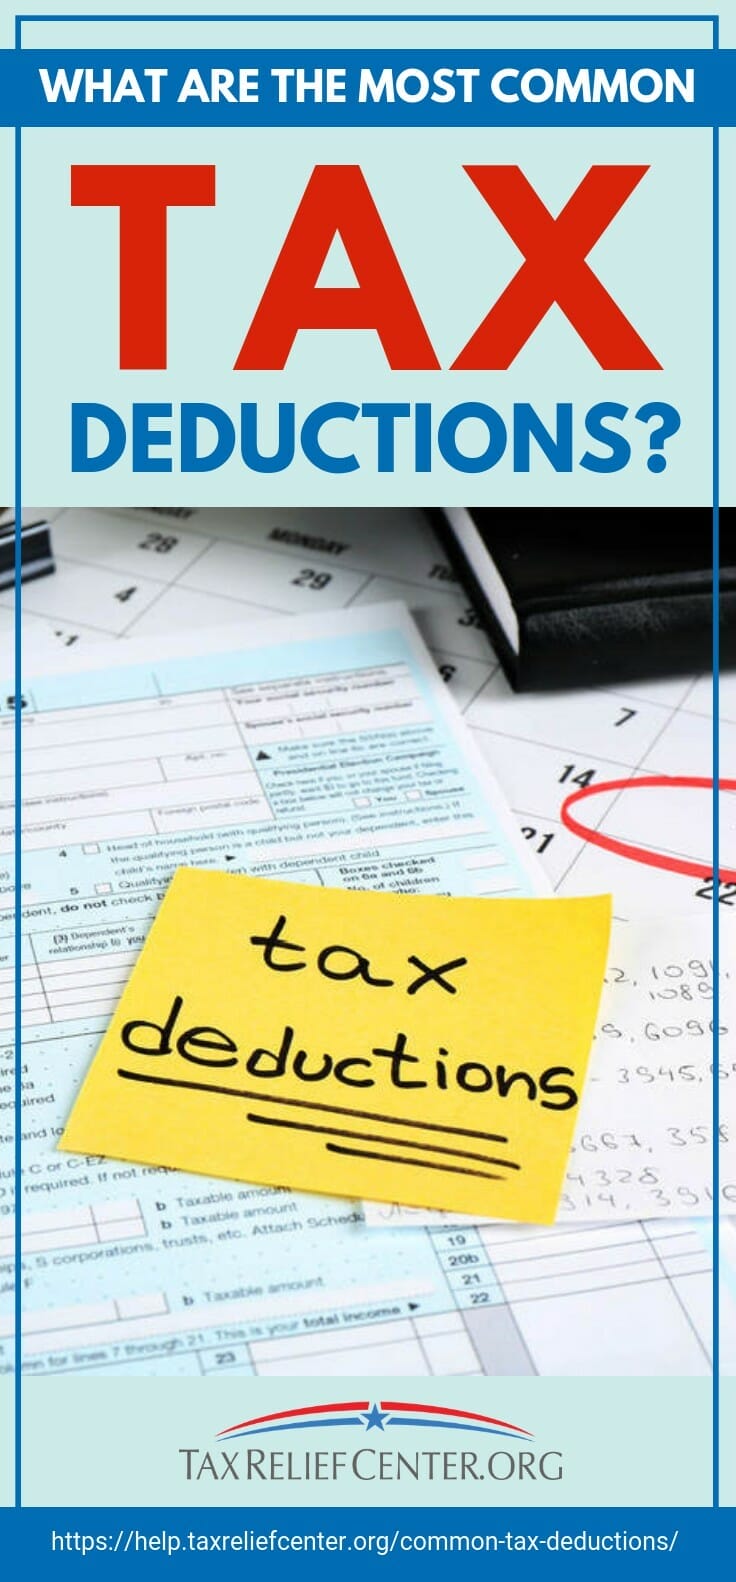 What Are The Most Common Tax Deductions? | Tax Relief Center | https://help.taxreliefcenter.org/common-tax-deductions/